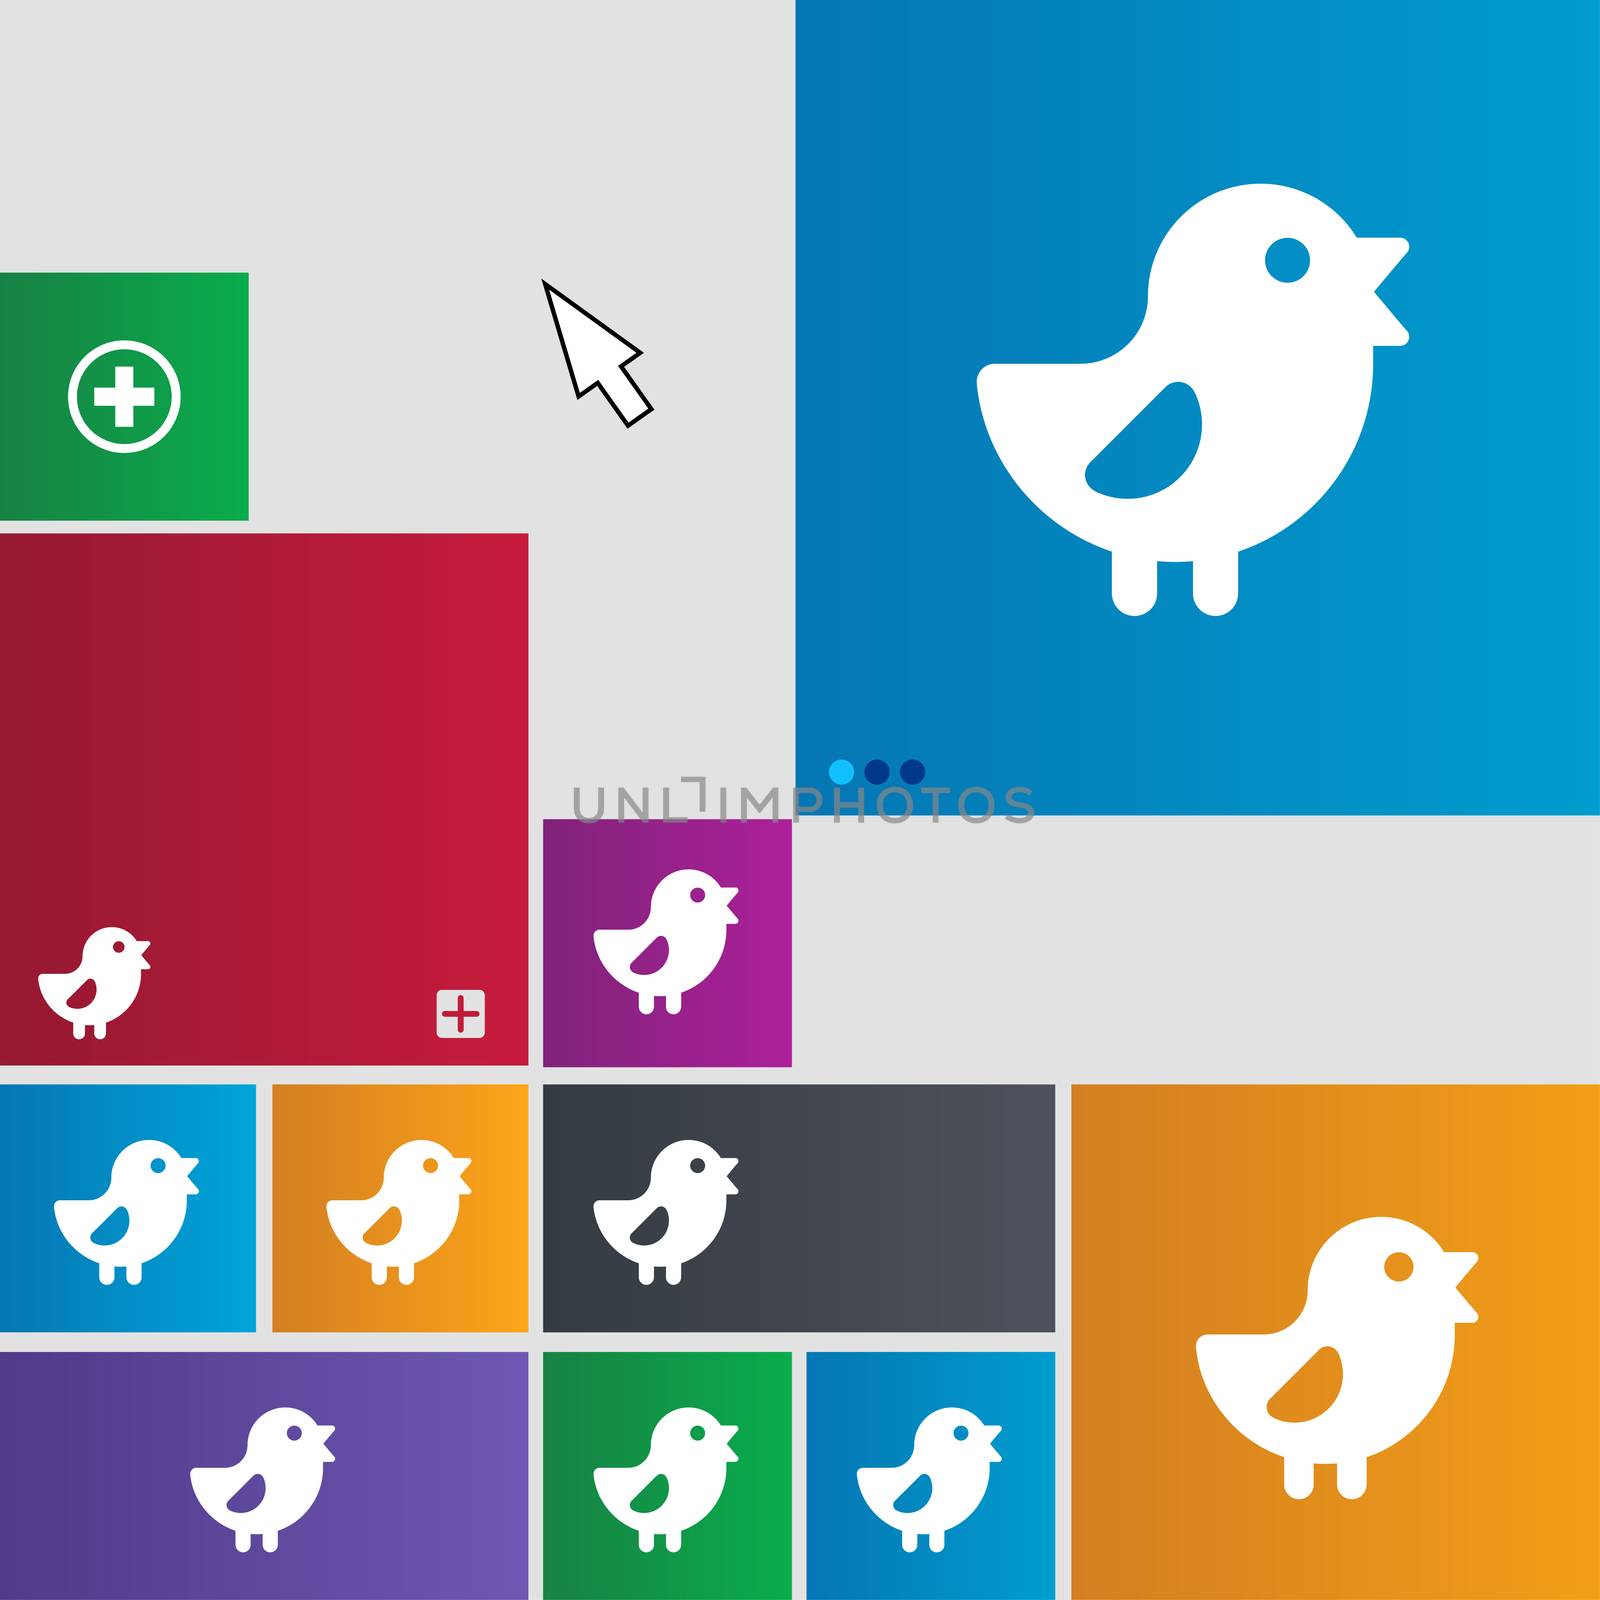 chicken, Bird icon sign. buttons. Modern interface website buttons with cursor pointer. illustration